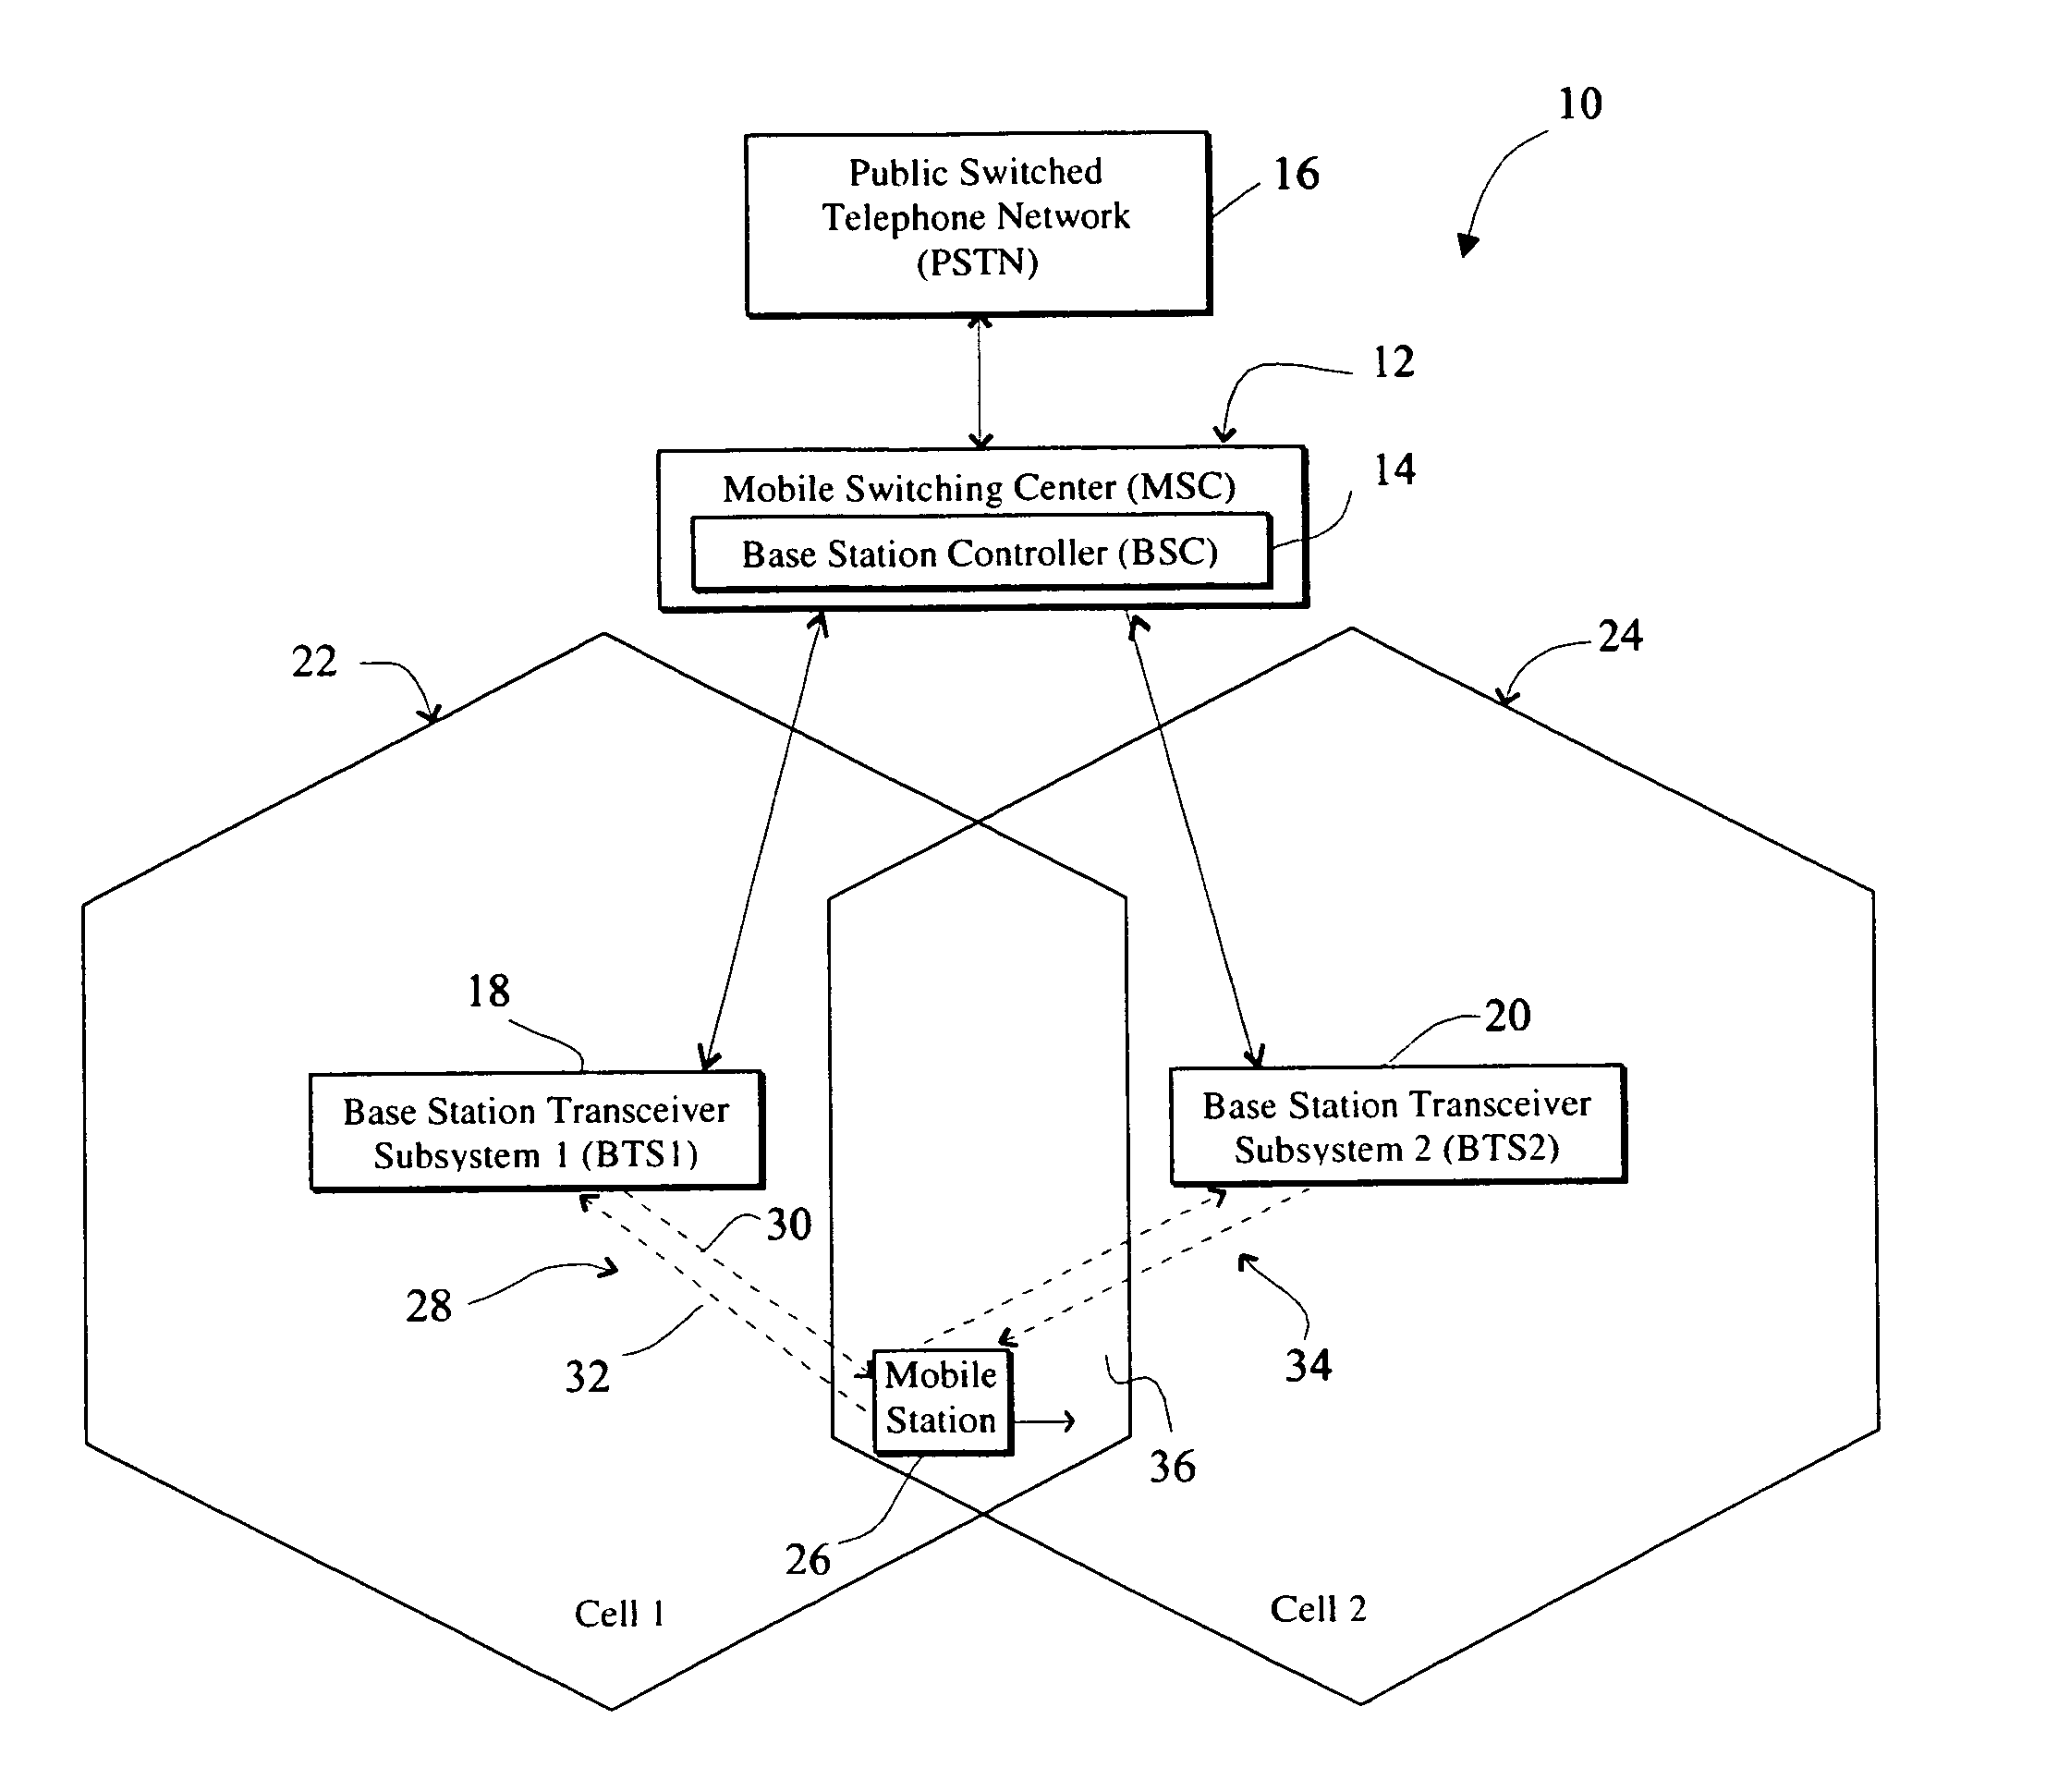 Wireless communications receiver employing a unique combination of quick paging channel symbols to facilitate detection of a primary paging channel